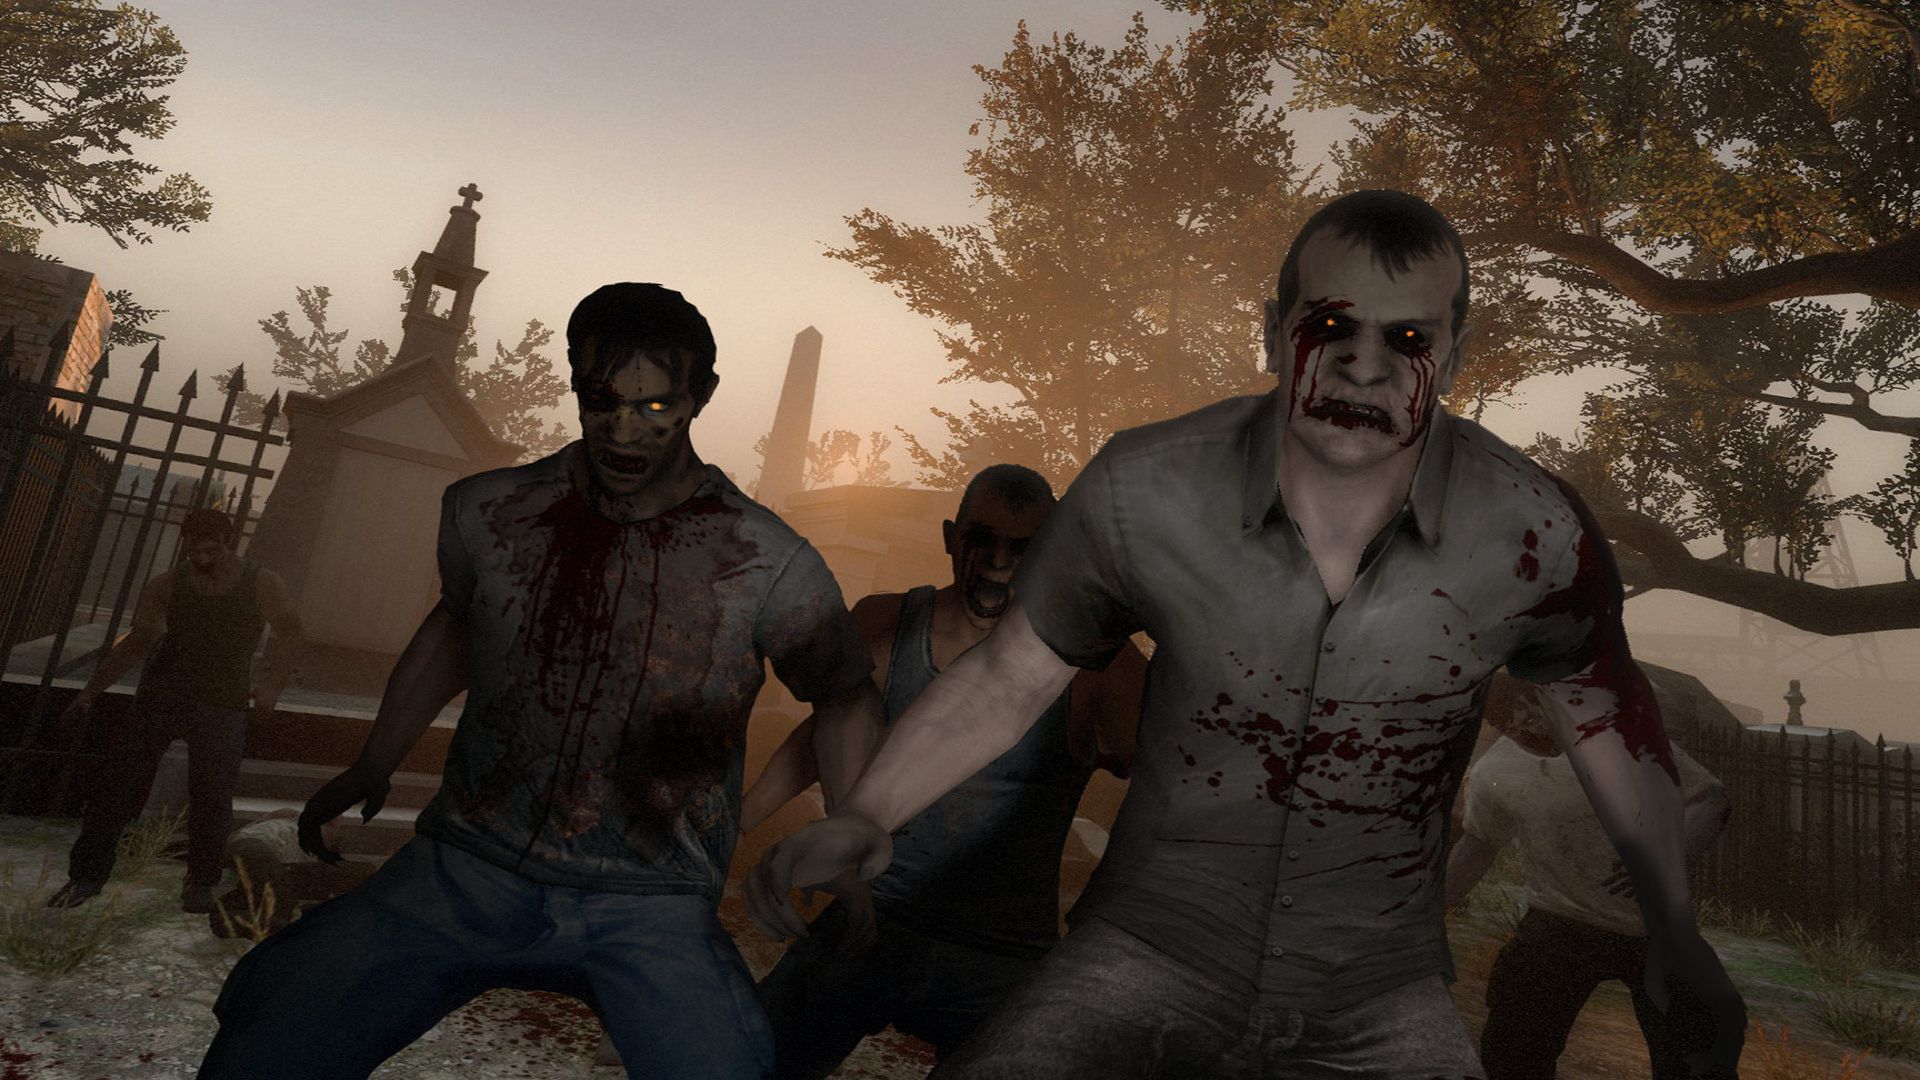 L4D2 horde of zombies in a graveyard